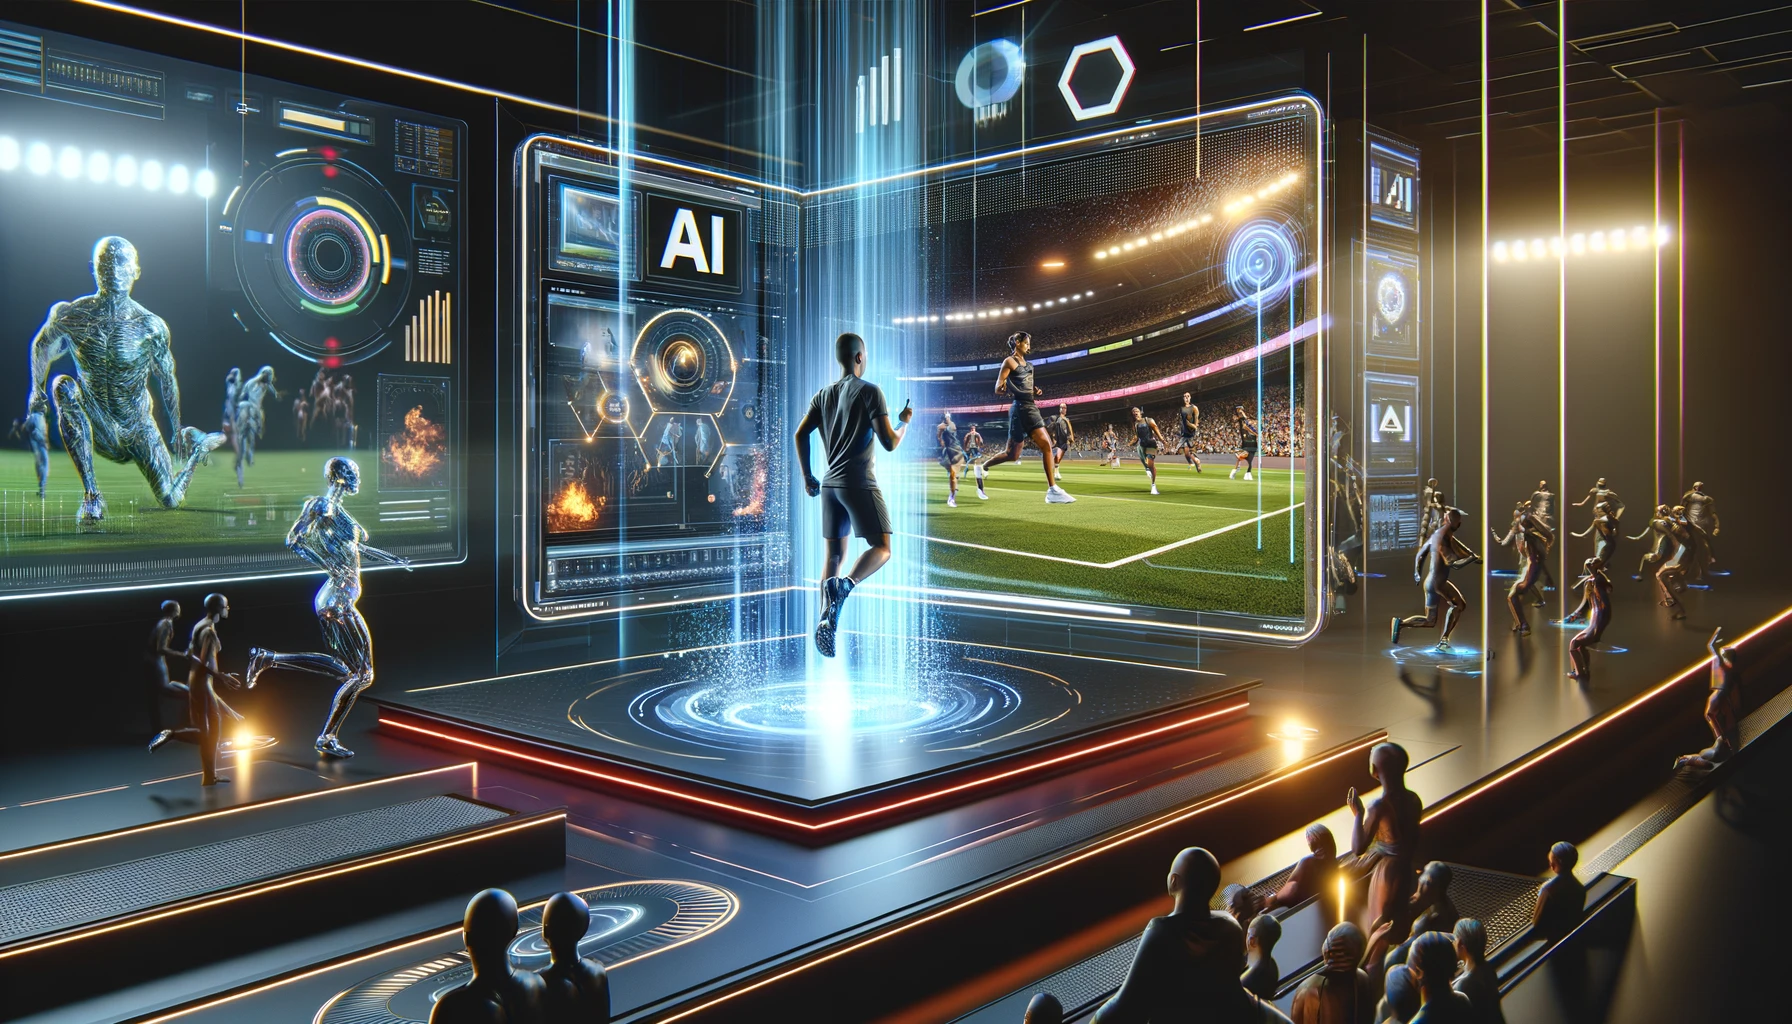 A futuristic scene with a holographic display showing athletes training, surrounded by AI elements providing real-time feedback and interactive charts, illustrating advanced commercial video content.